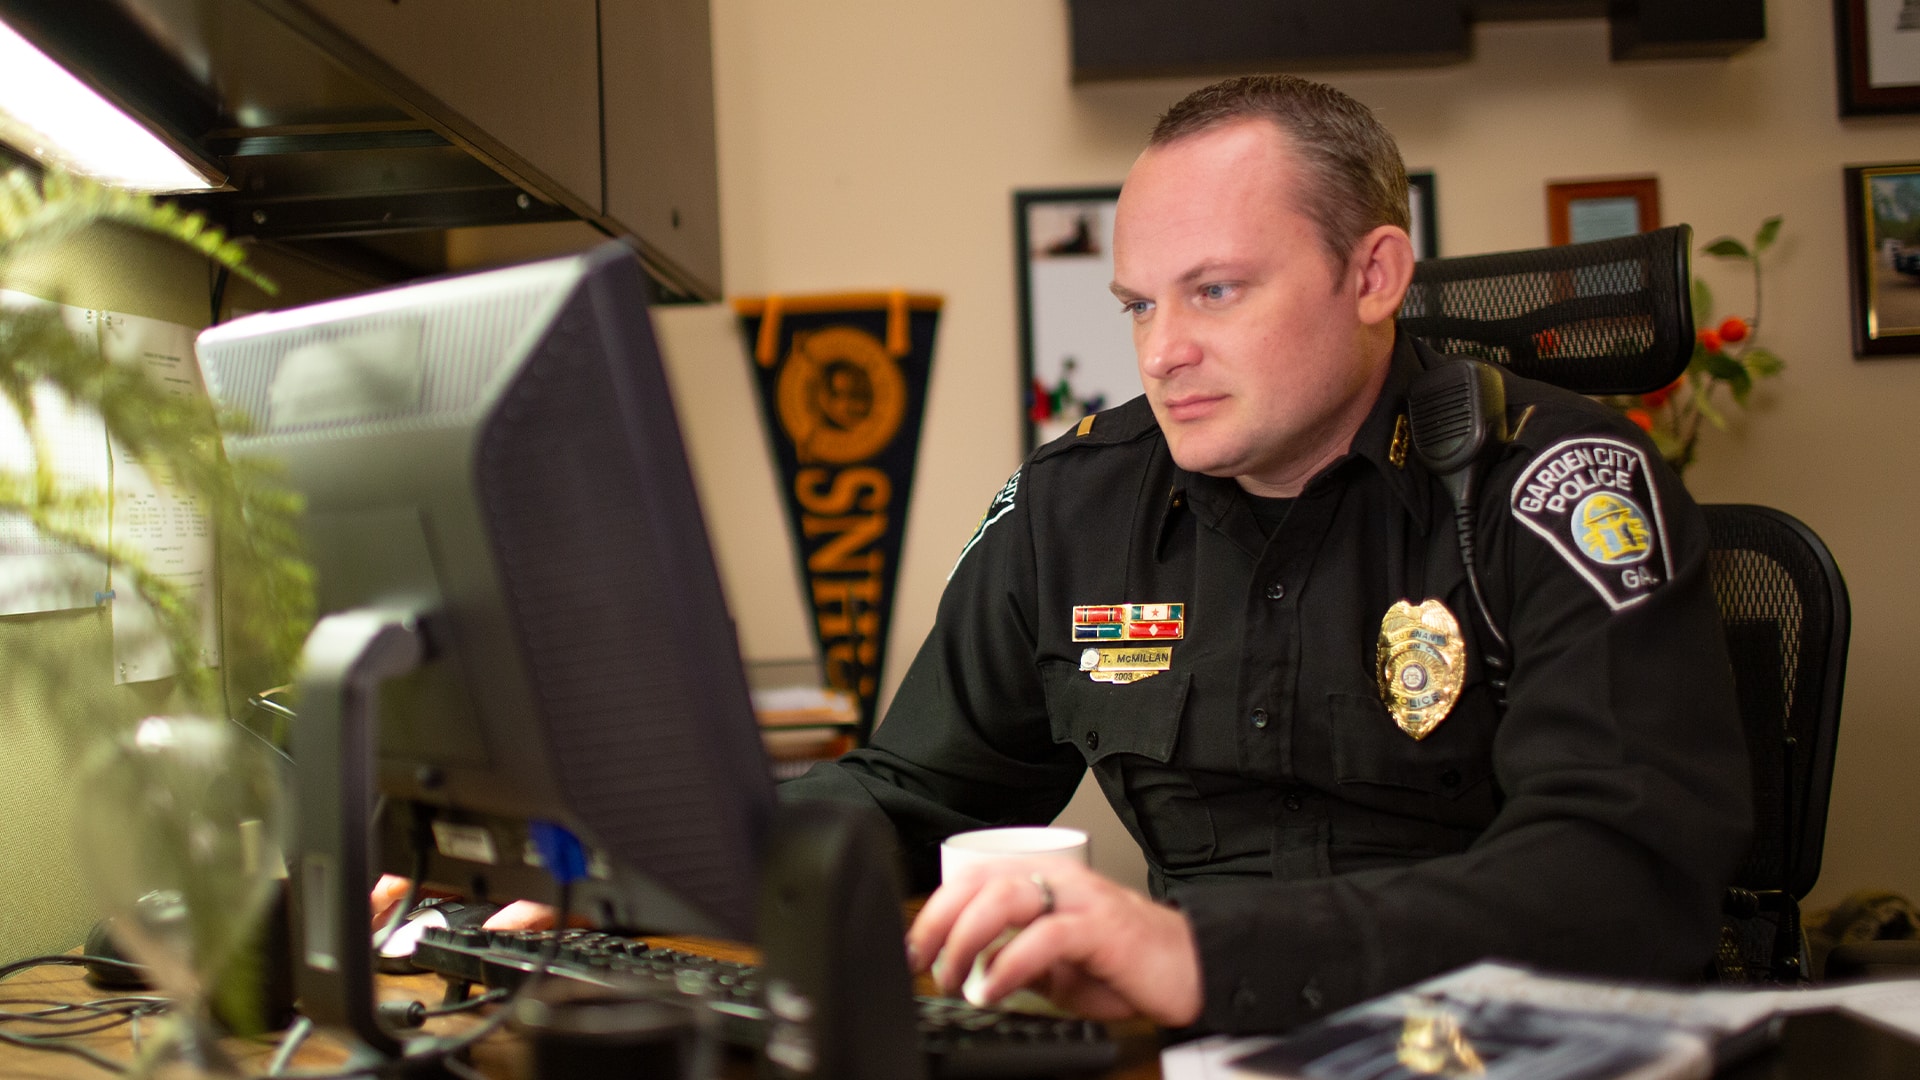 Tim McMillan, who earned his degree from SNHU in 2015, wearing his police uniform in an office working on a computer with an SNHU pennant on the wall in the background.